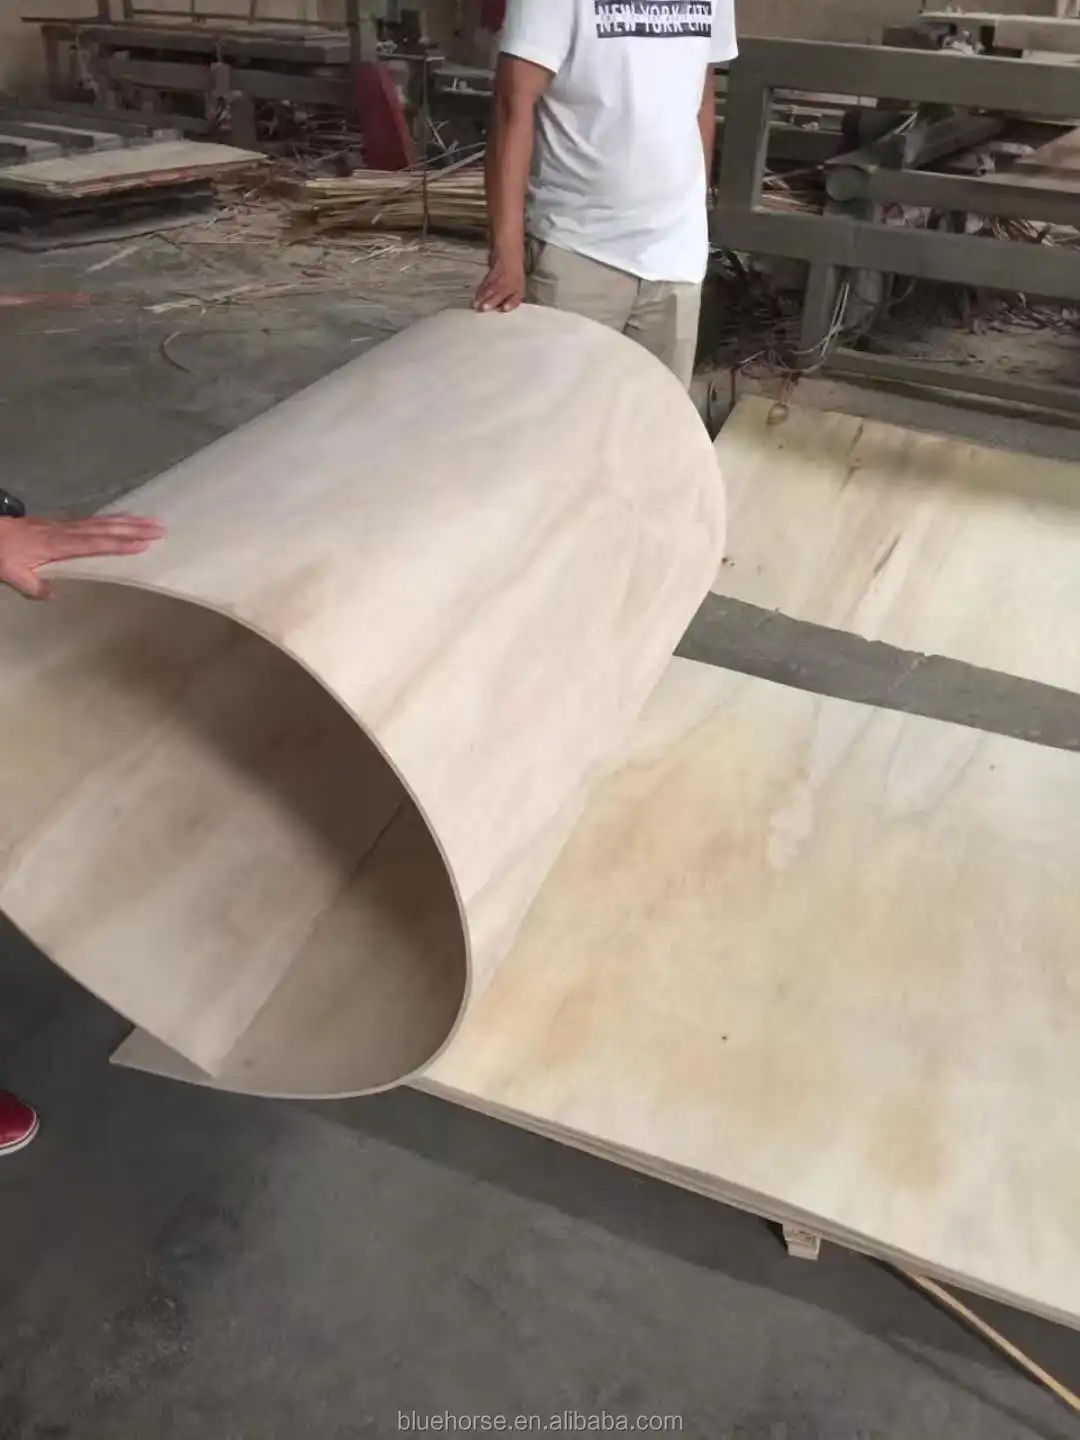 Bending Curved Plywood 5 Mm,Bendable Curved Plywood,Flexible Plywood ...